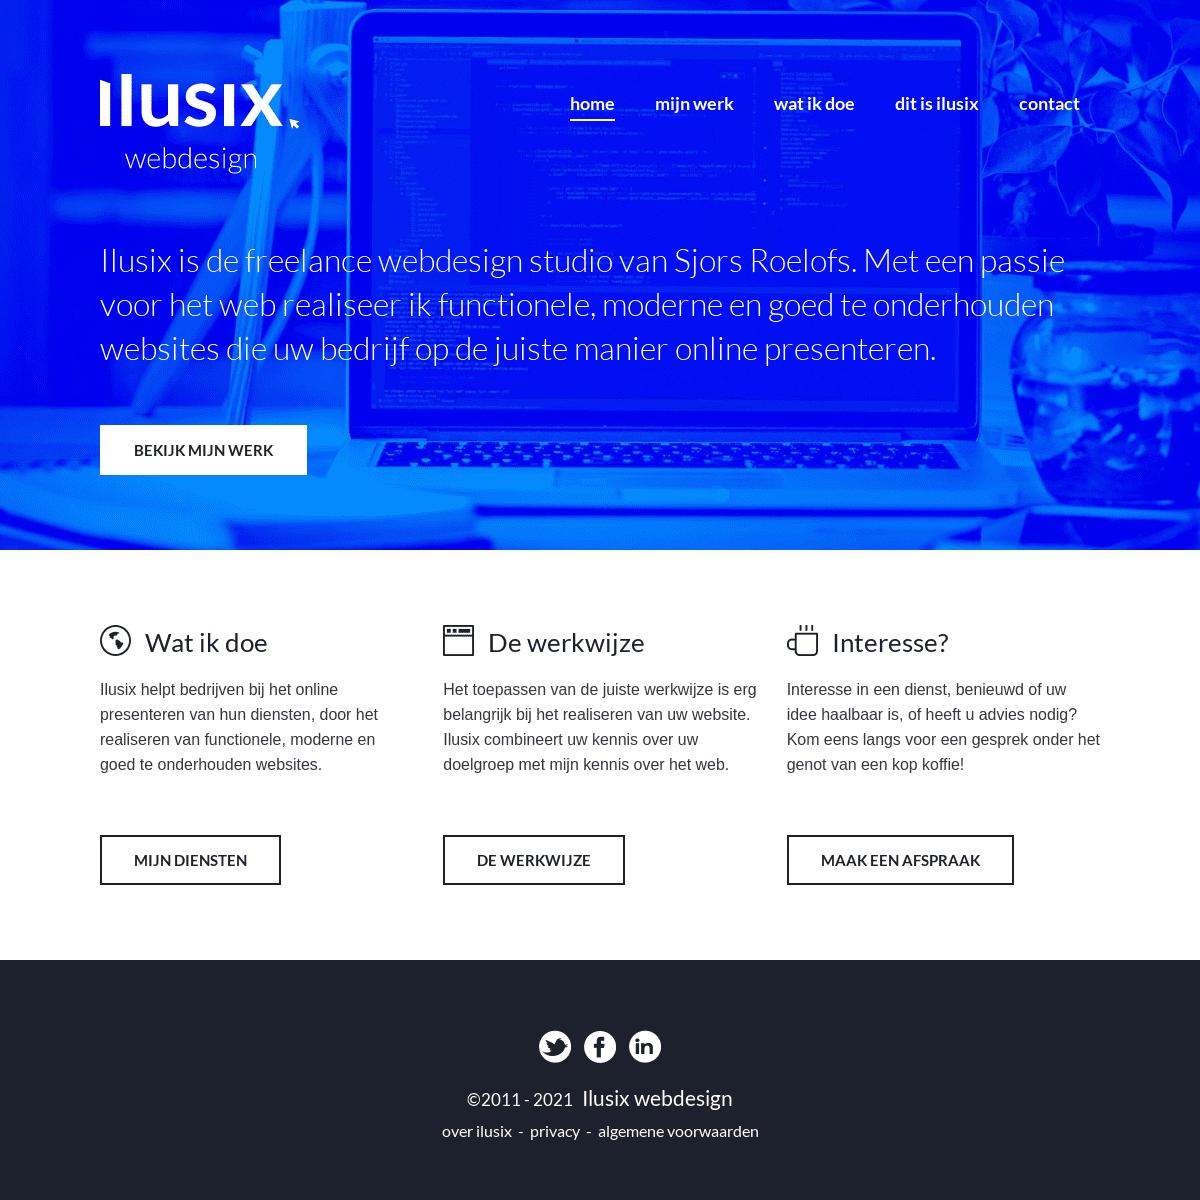 A complete backup of https://ilusix.nl